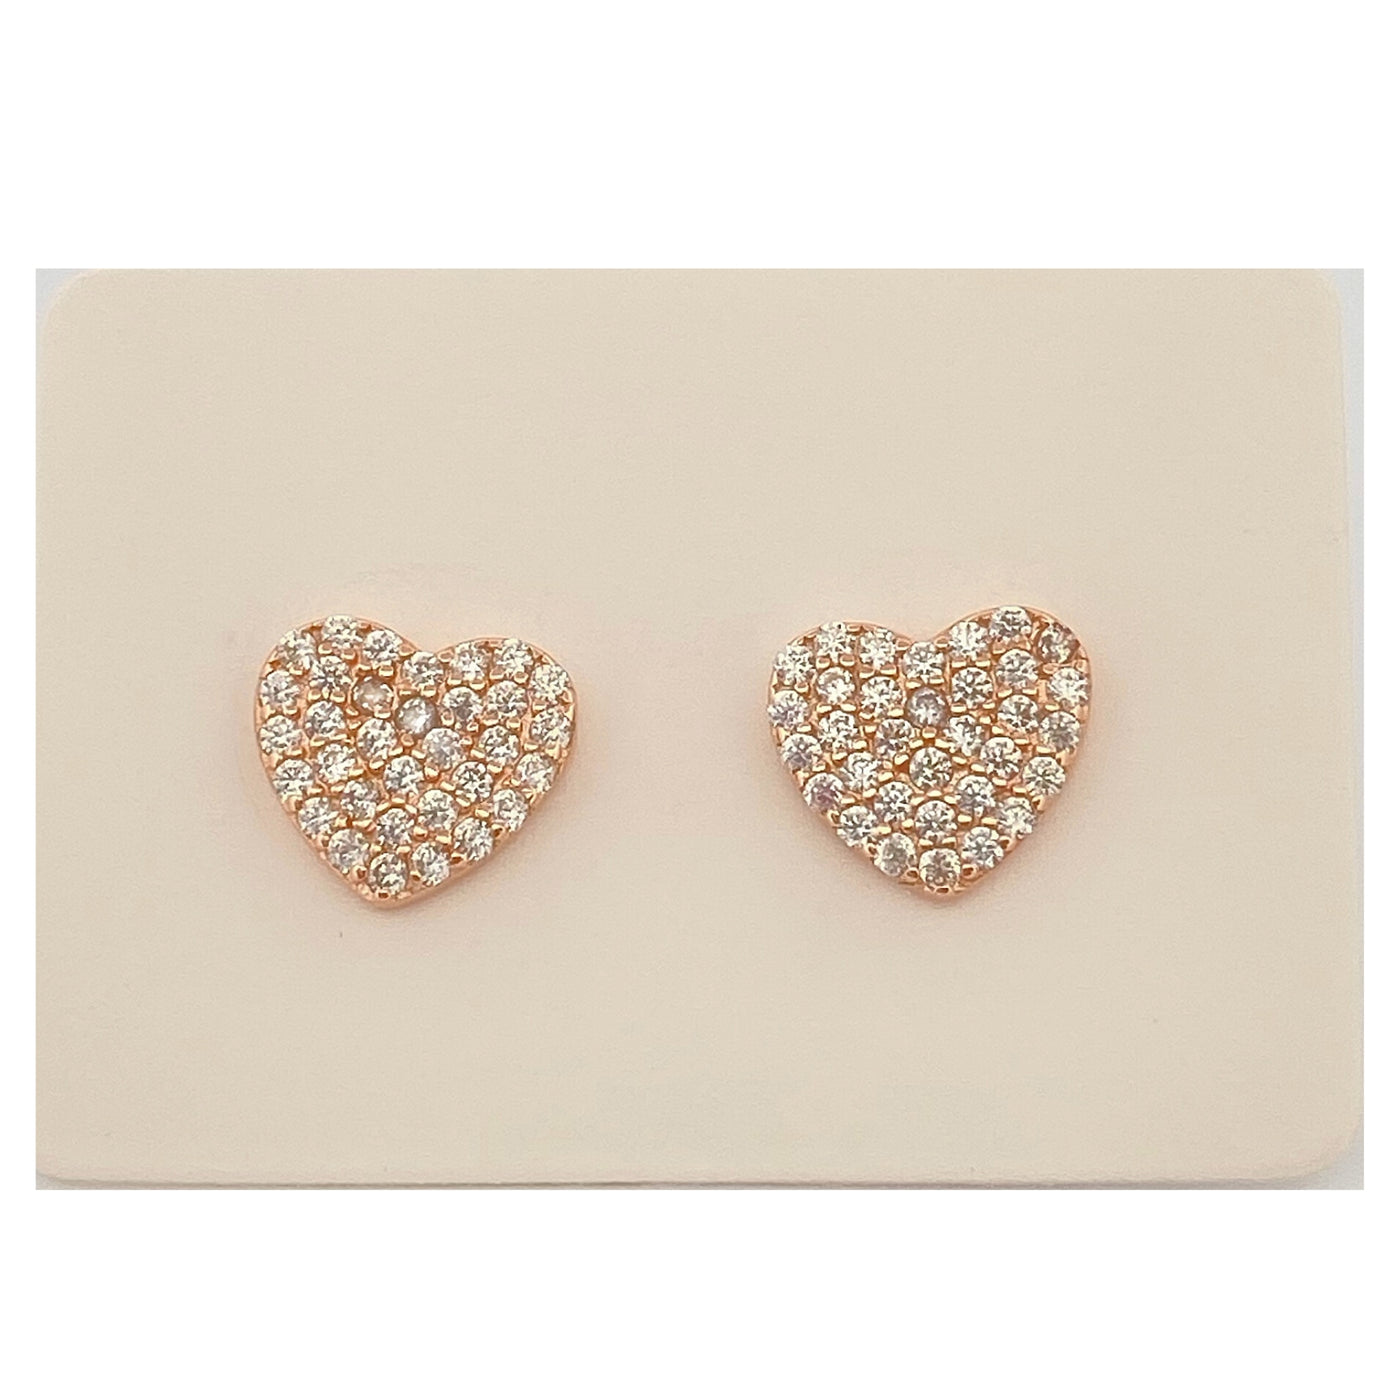 Pack of 5 silver heart stud earrings with cubic zirconia - 8 mm